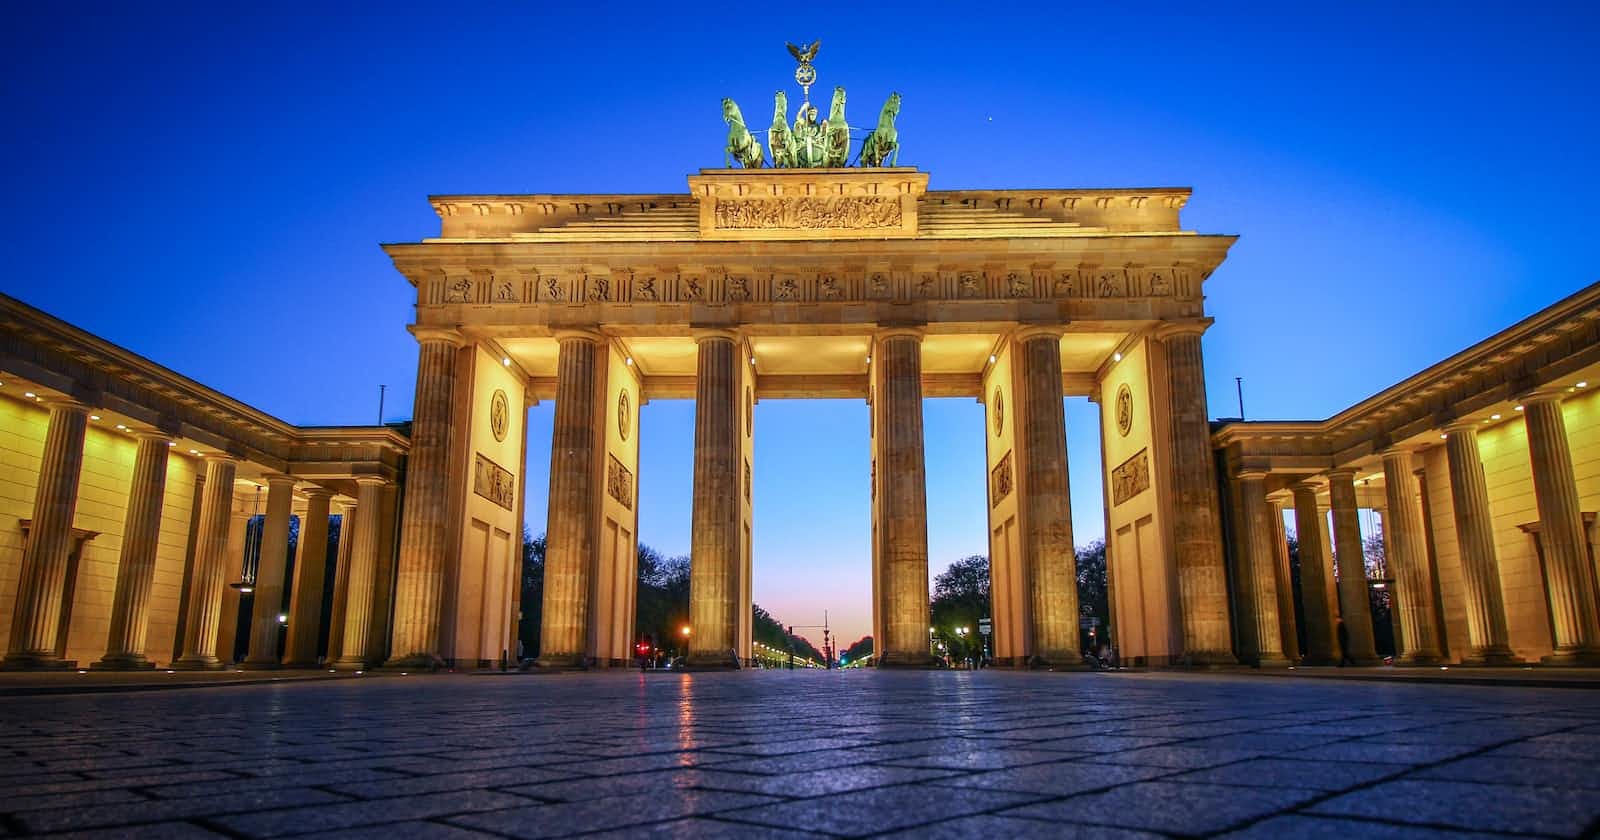 Moving to Berlin and finding a new job